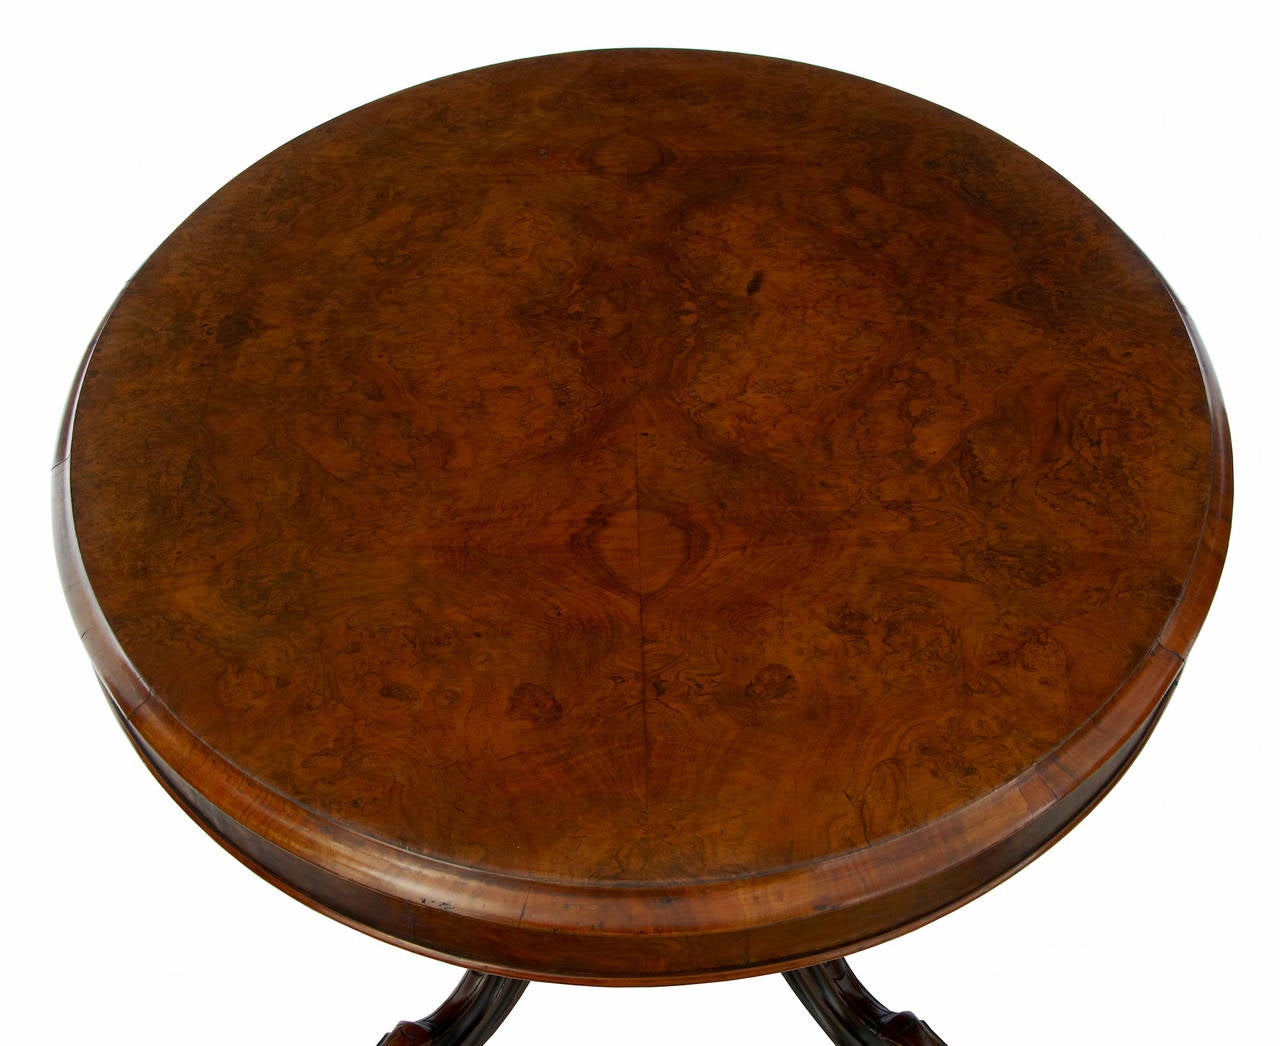 Great Britain (UK) 19th Century Carved Walnut Oval Tilt-Top Occasional Table